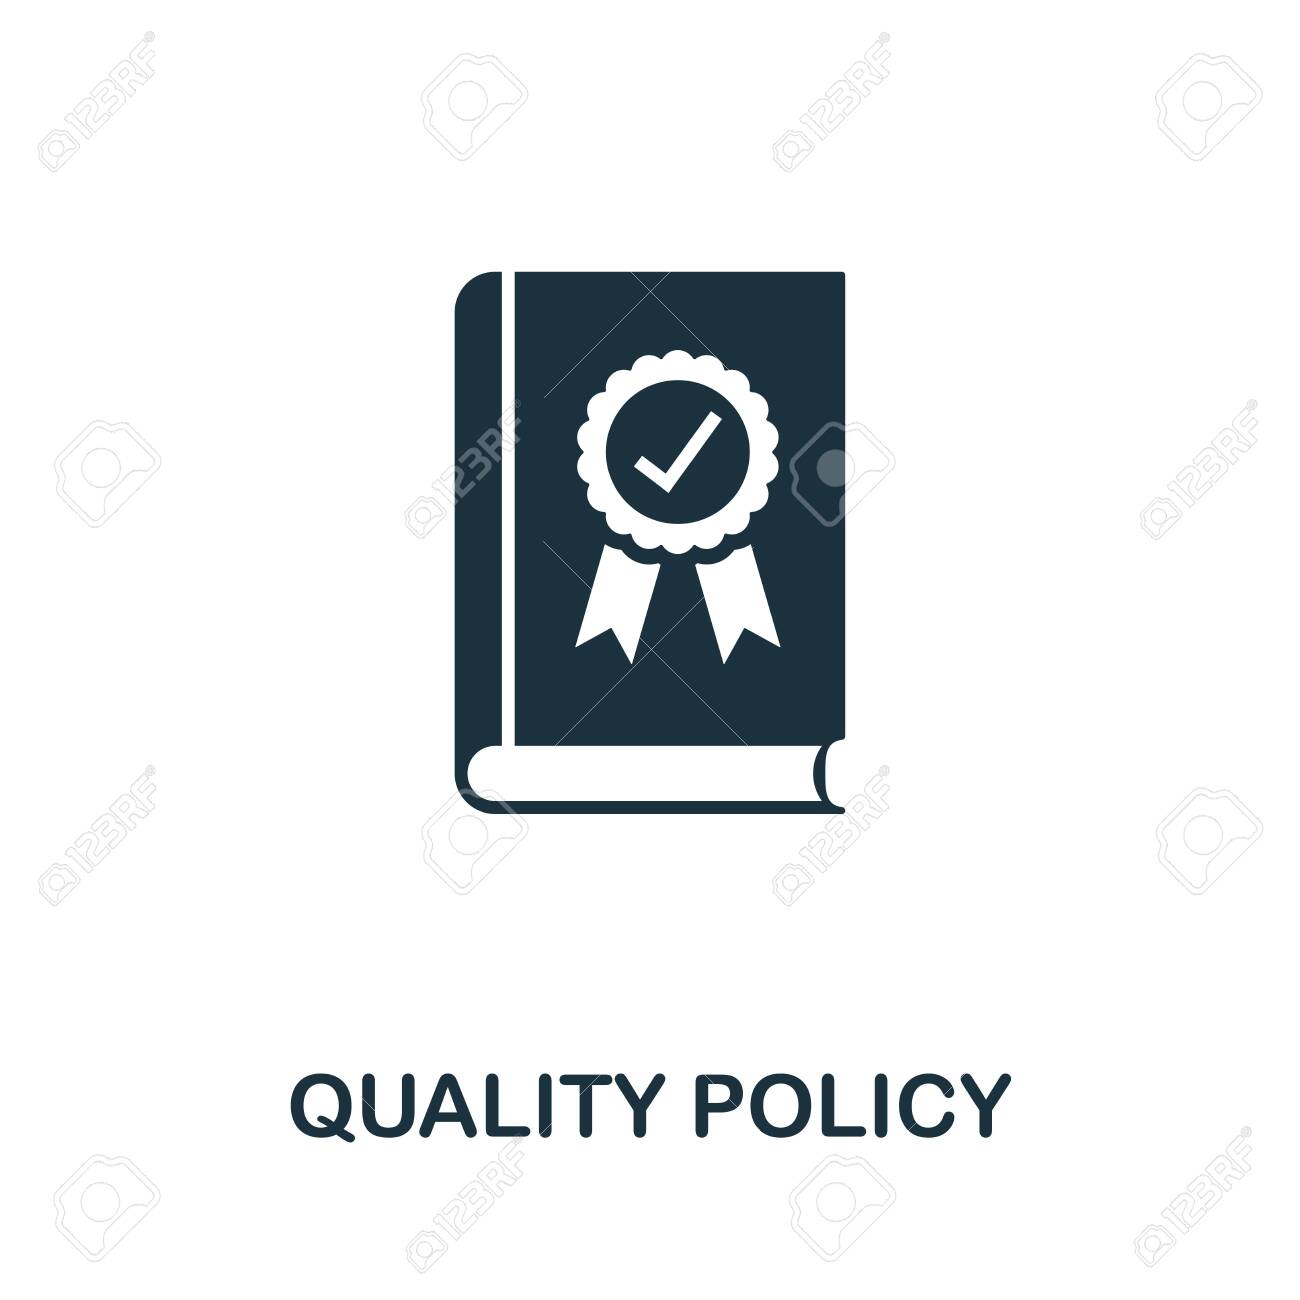 Quality Policy vector icon illustration. Creative sign from quality control icons collection. Filled flat Quality Policy icon for computer and mobile. Symbol, logo vector graphics.